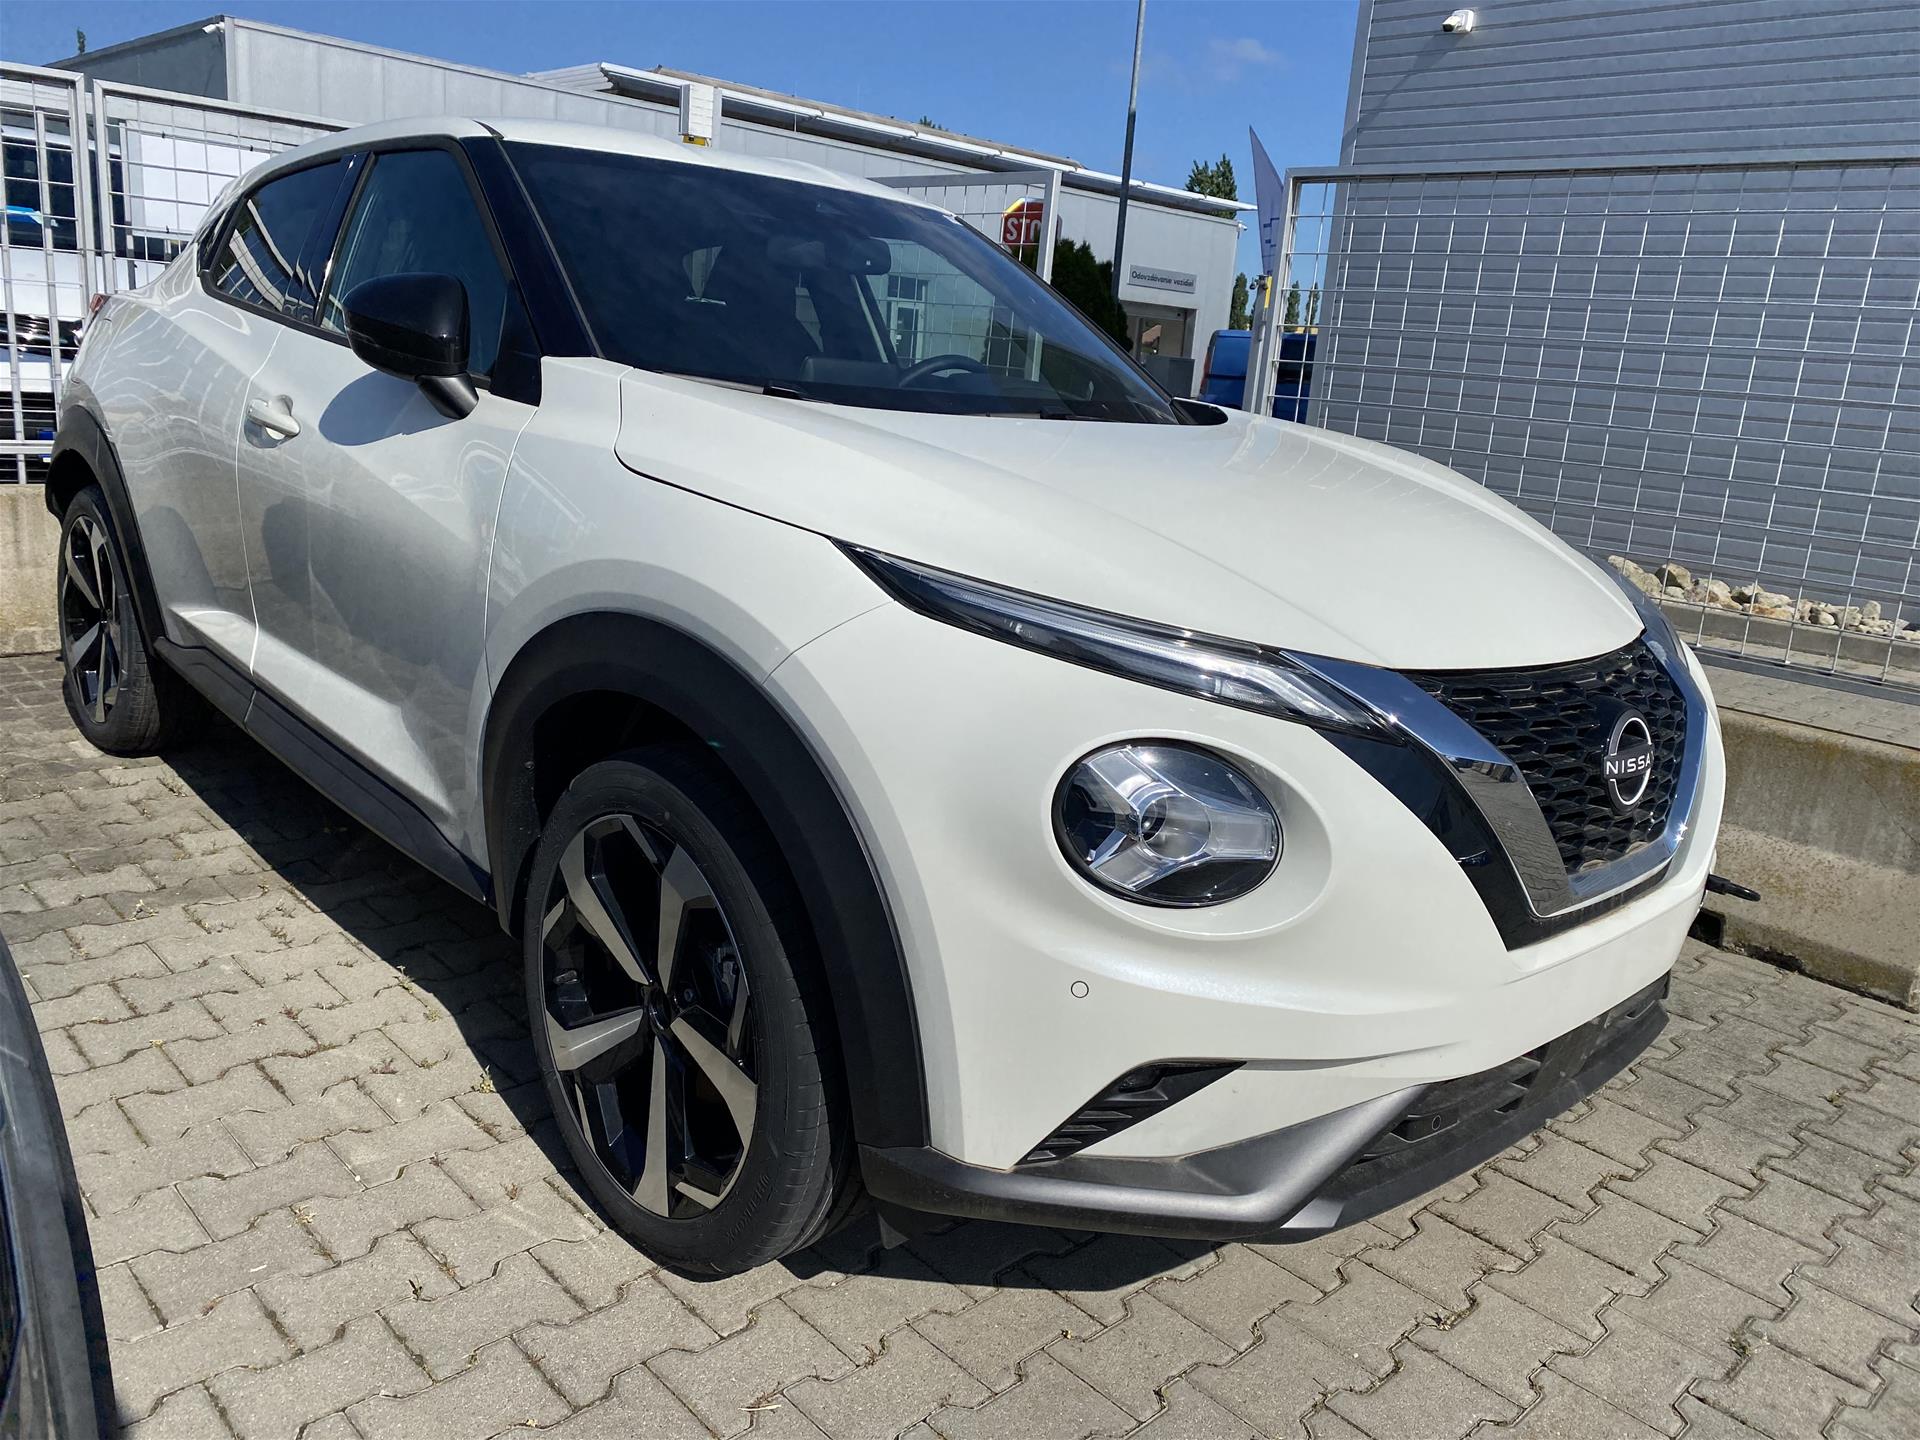 Autoprofit.sk NISSAN JUKE 1.0 DIG-T 114 7DCT N-CONNECTA + Cold pack + 19"" alloy wheels